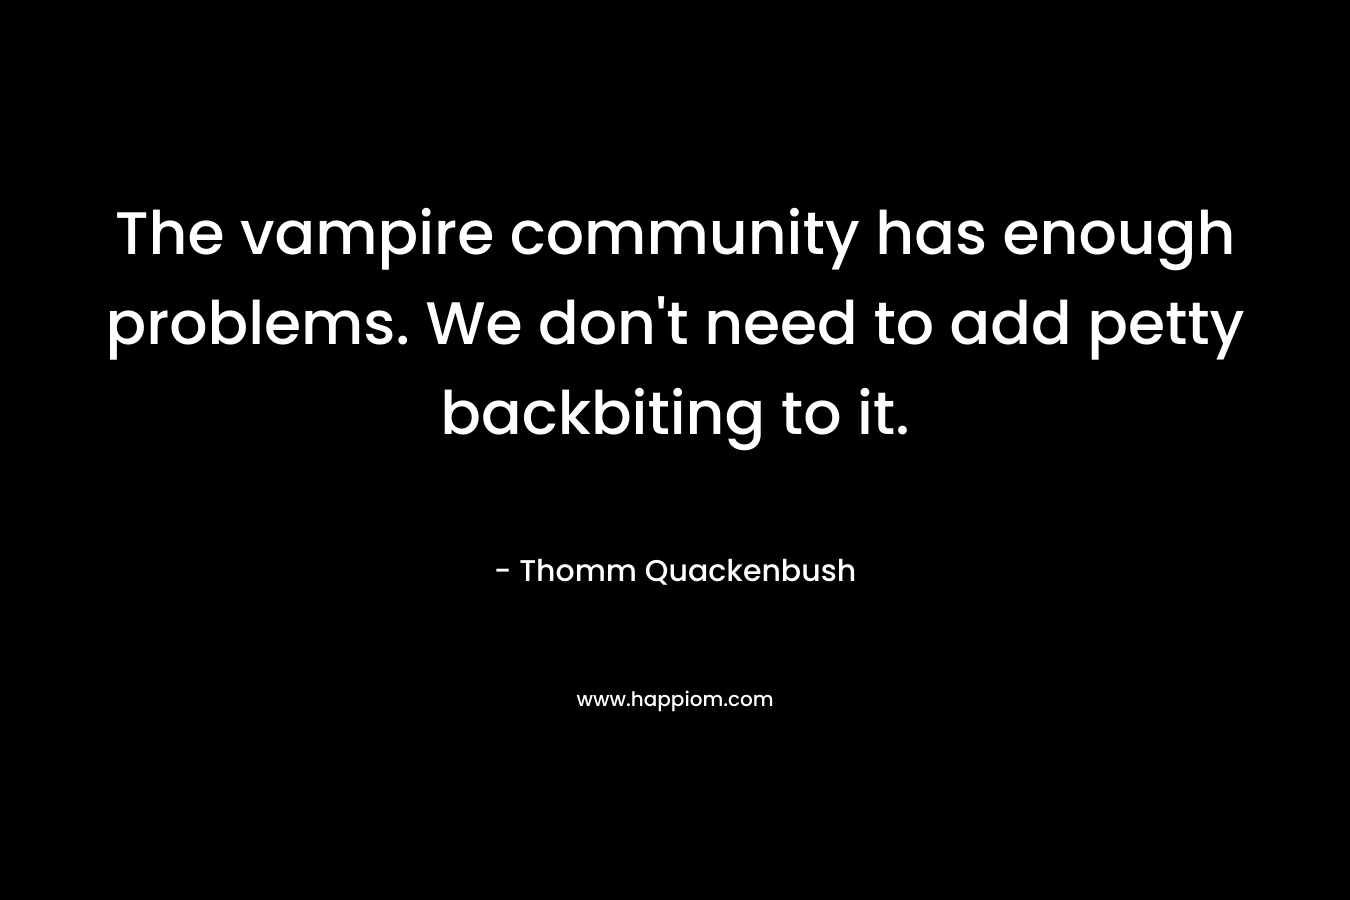 The vampire community has enough problems. We don't need to add petty backbiting to it.